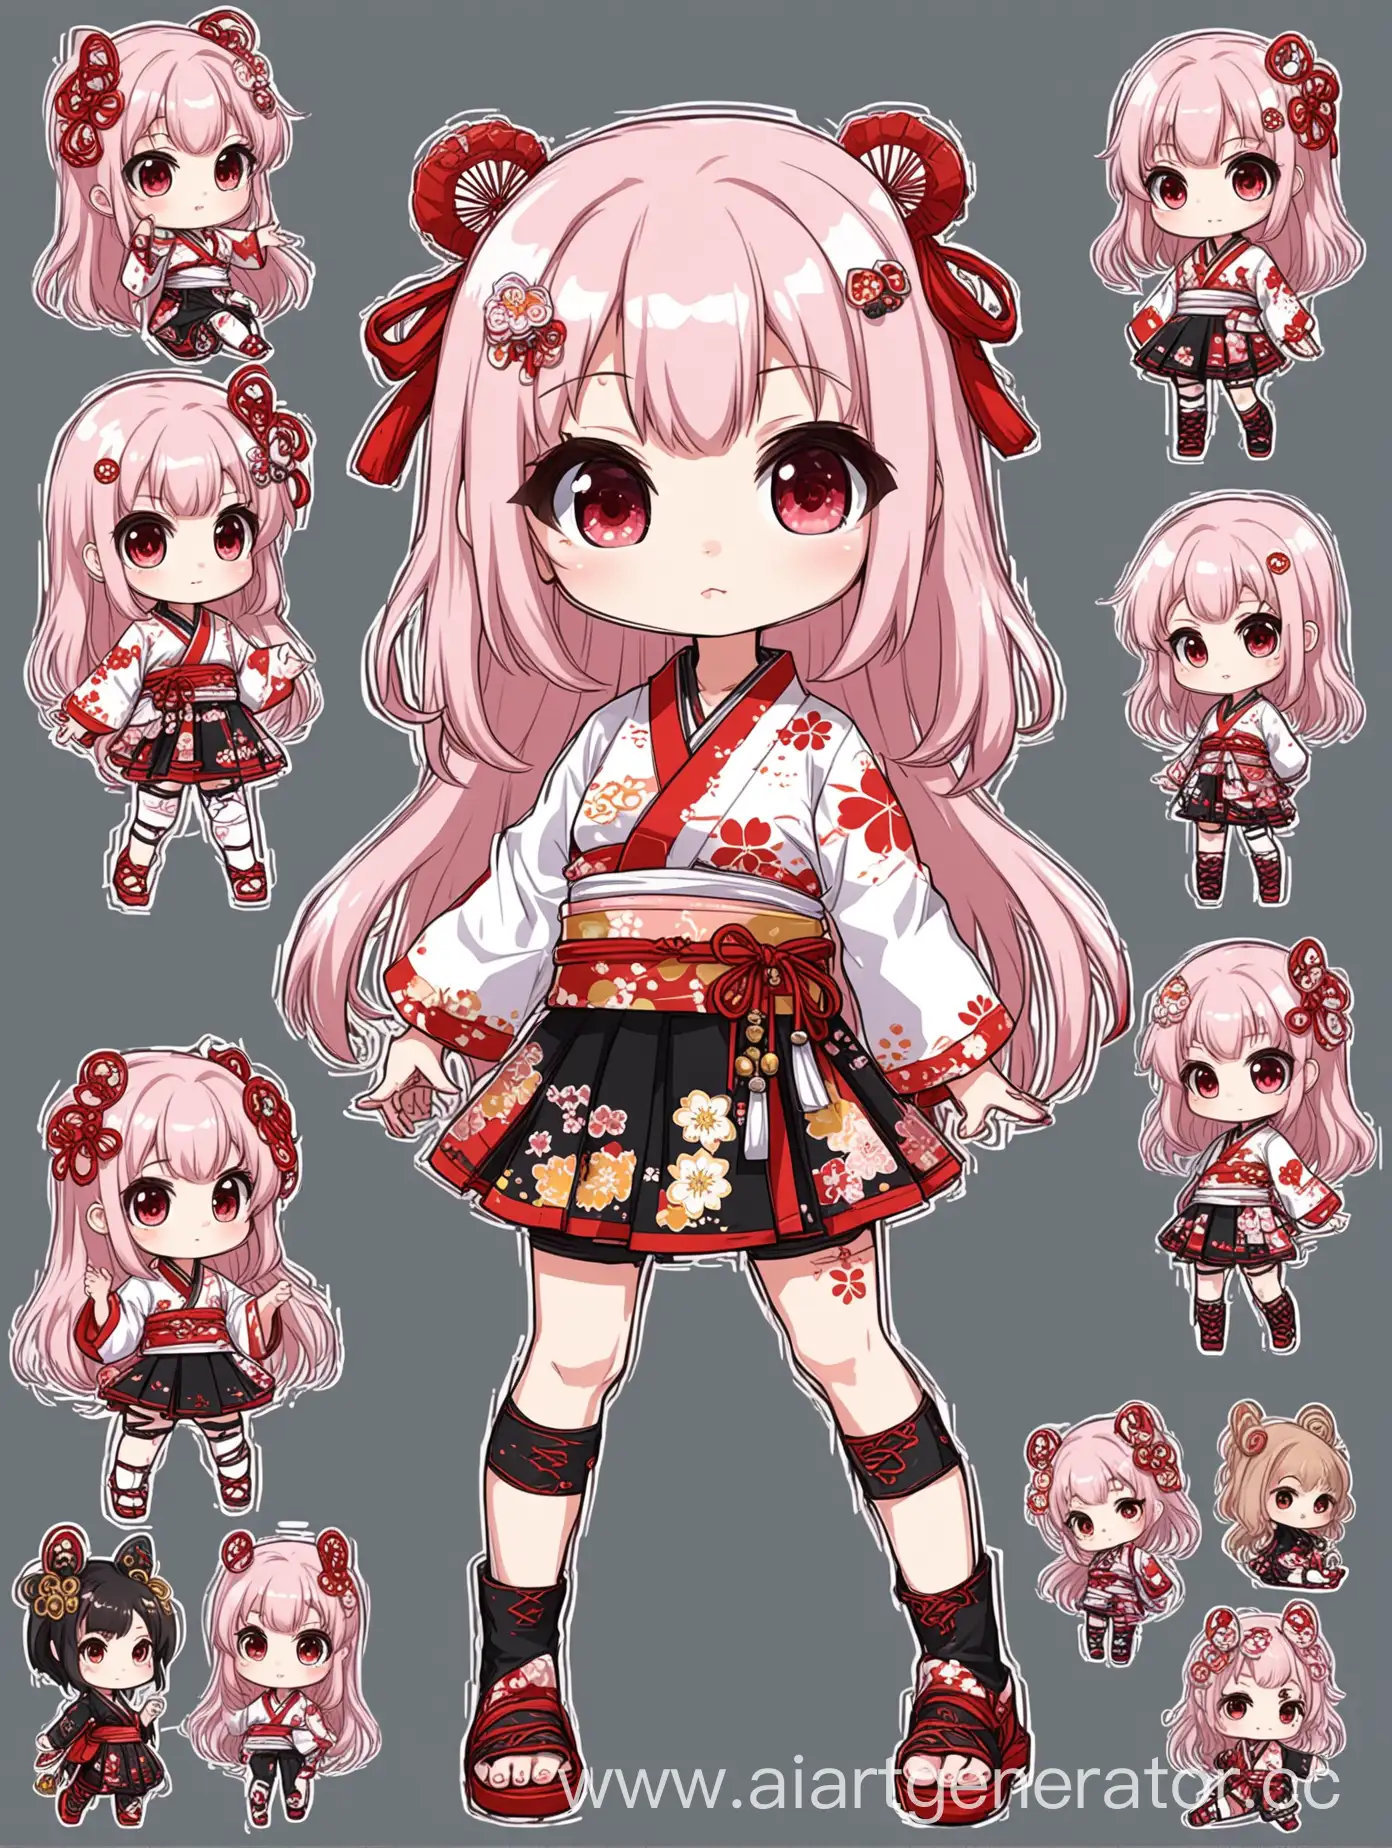 Detailed-Chibi-Anime-Girl-in-Japan-Full-Body-Character-Reference